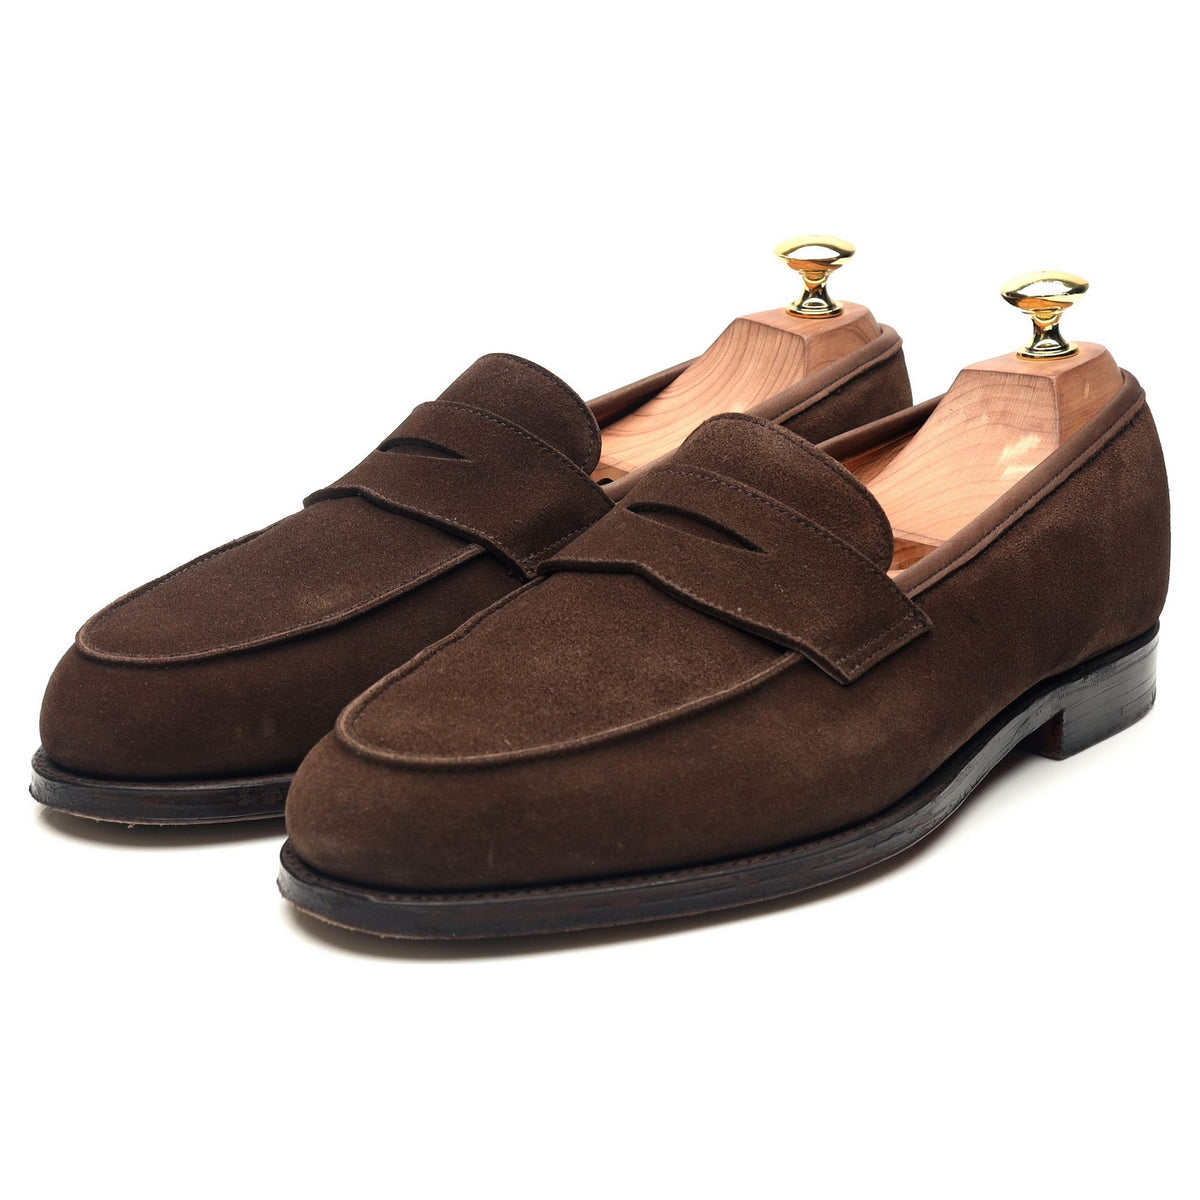 Giày lười Homme Boston - Classic Loafer Italian Leather Dress Shoes